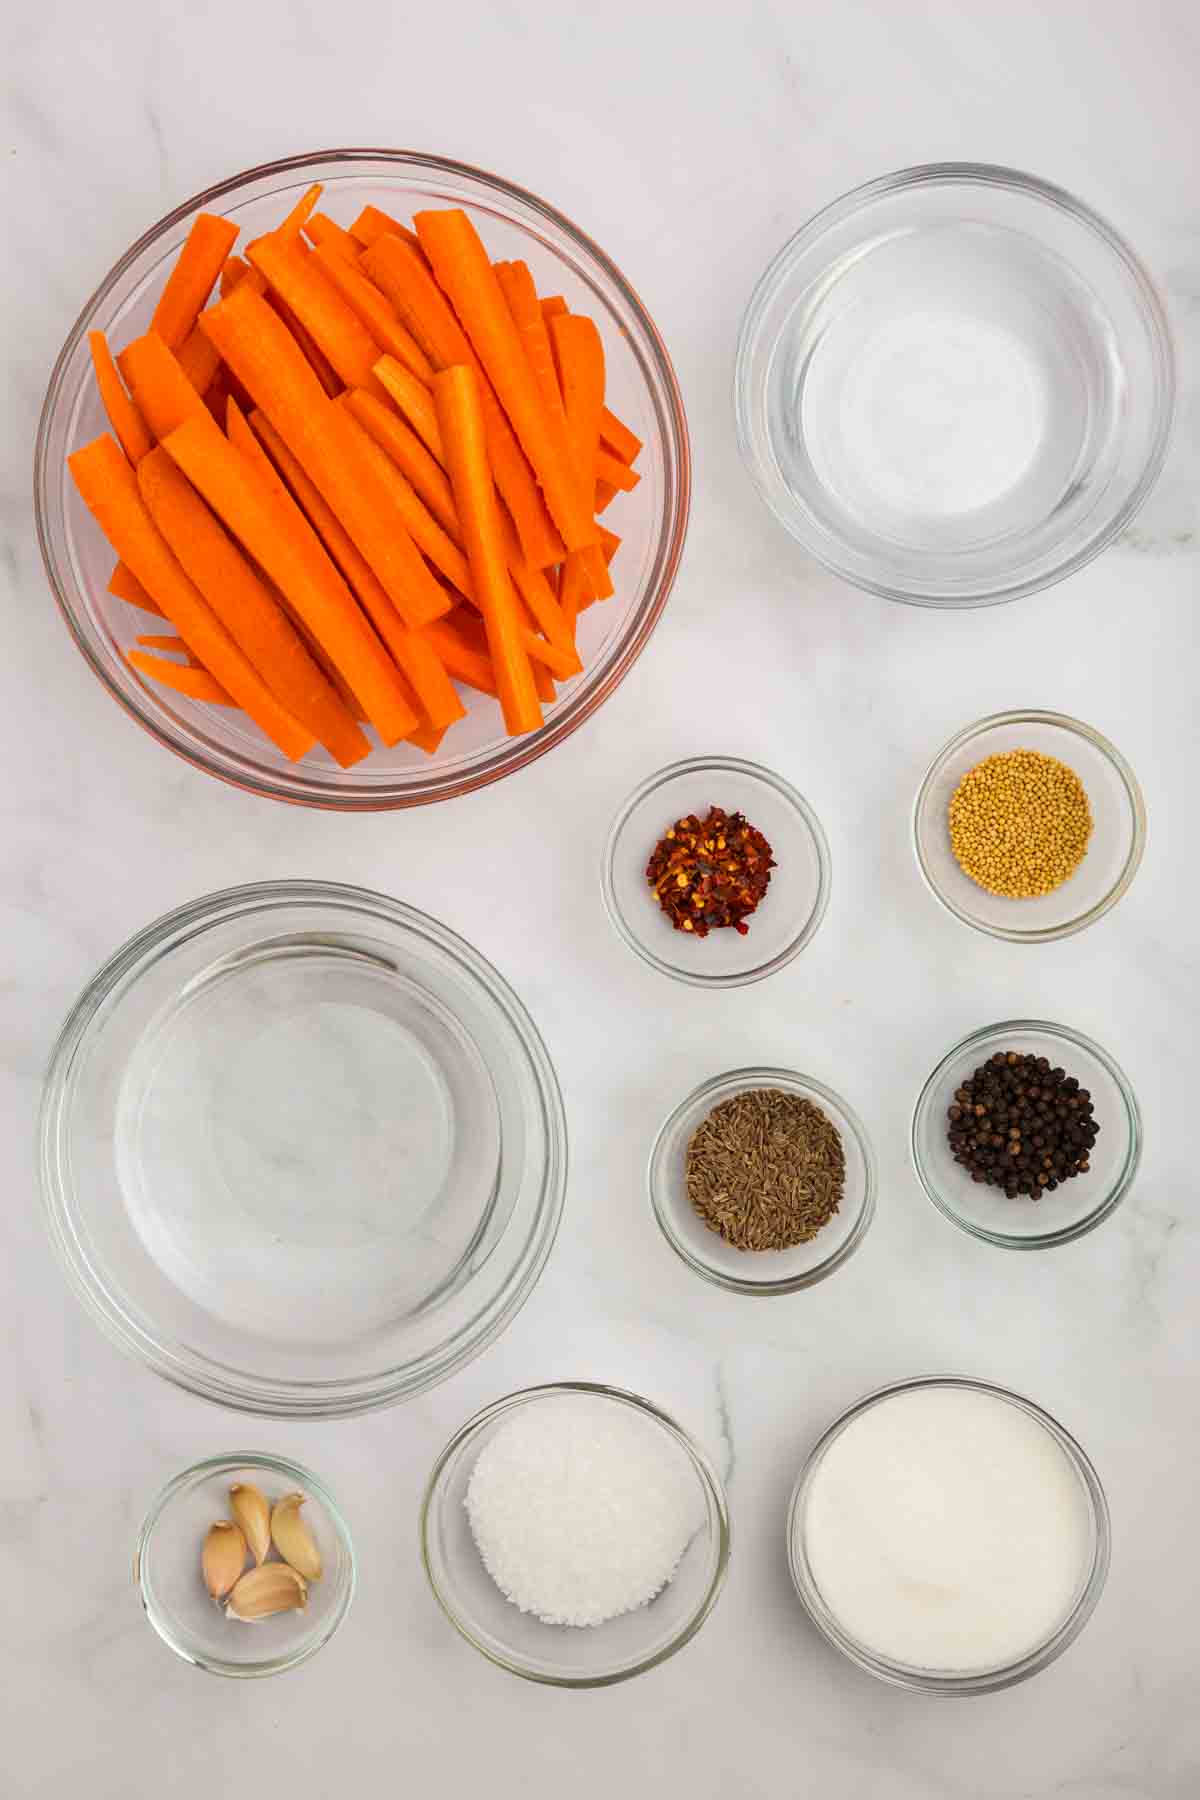 Ingredients for Pickled Carrots Recipe.